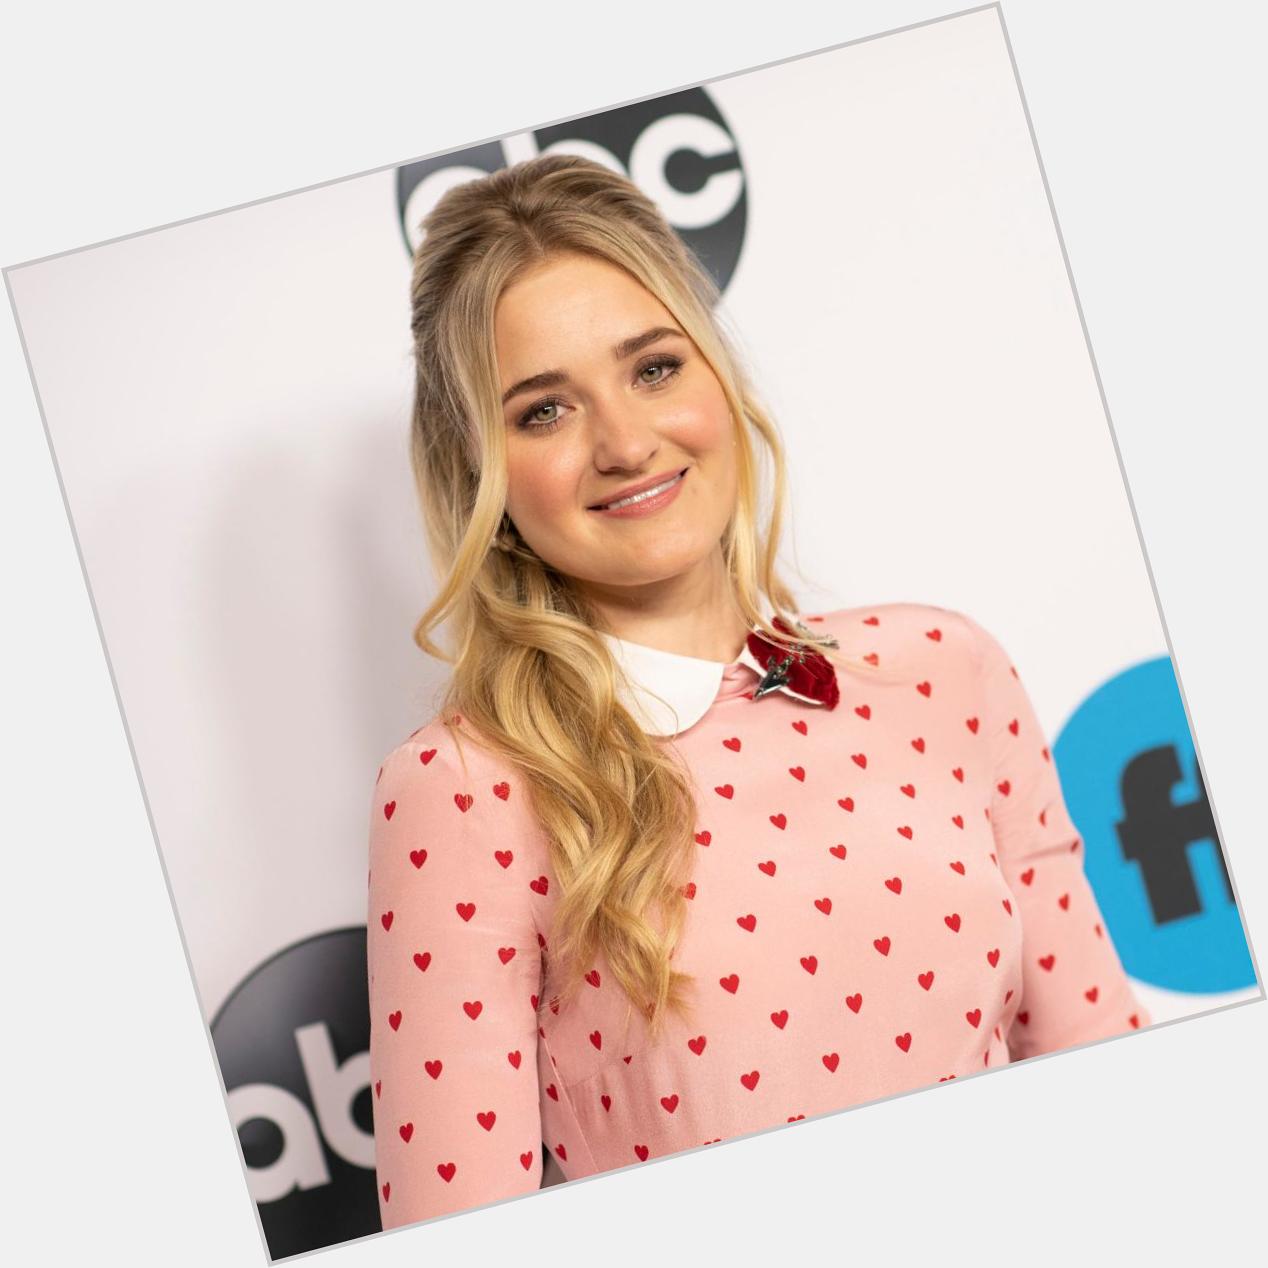 Happy Birthday to the amazing AJ Michalka from all of us at Rock on today!    